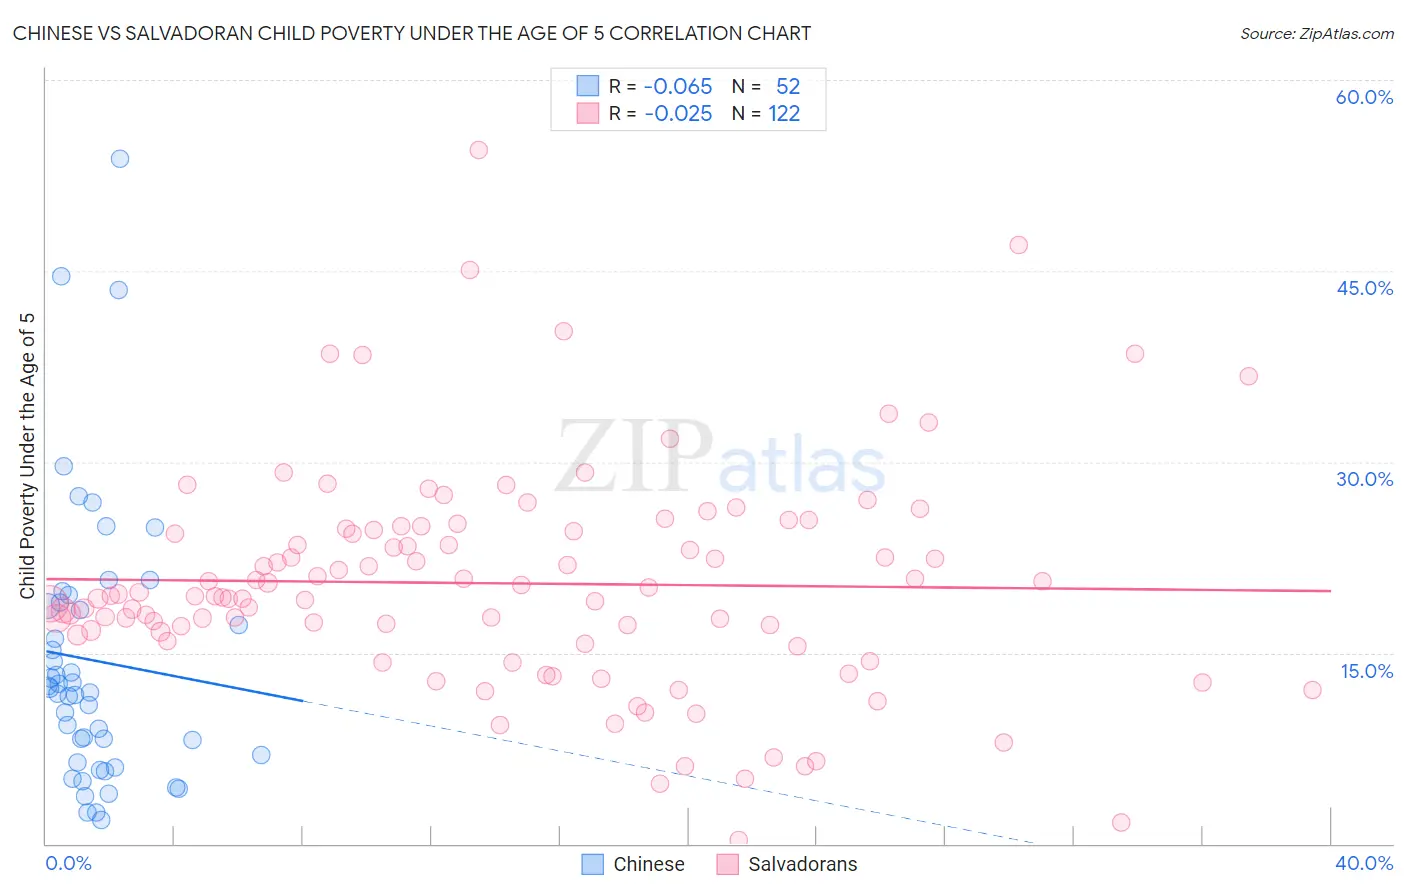 Chinese vs Salvadoran Child Poverty Under the Age of 5